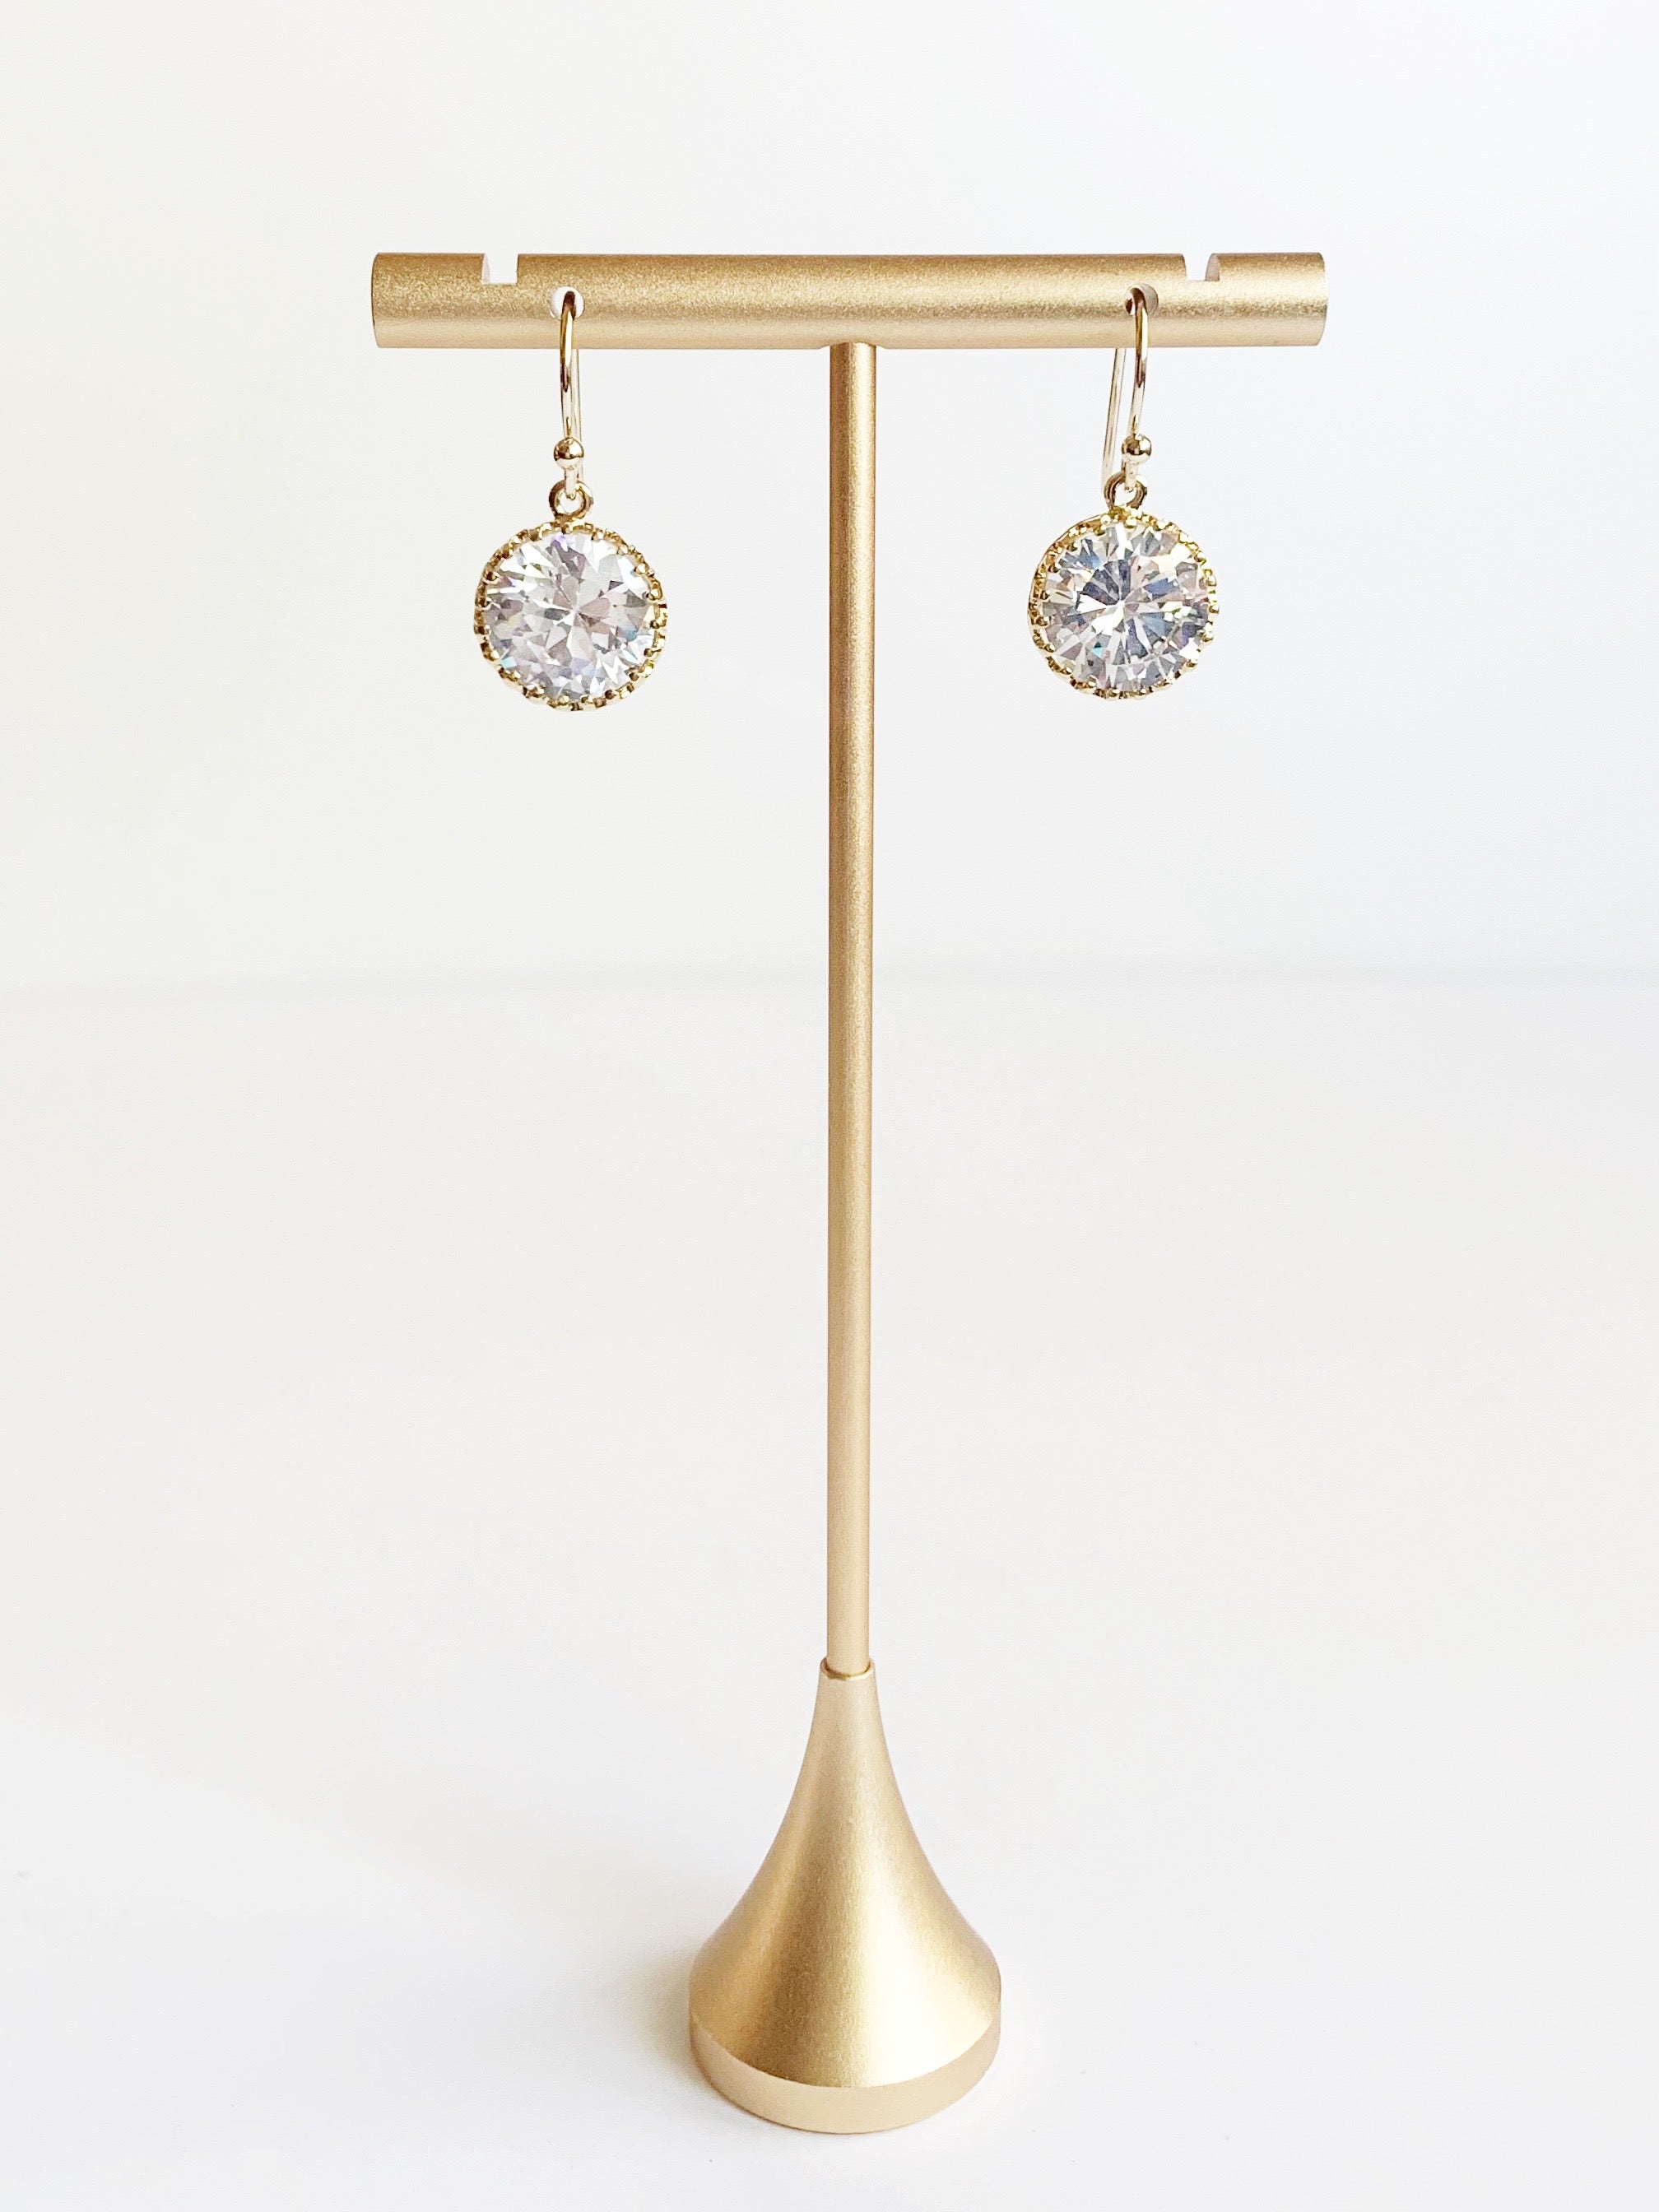 crystal dangle earrings in gold displayed on earring stand